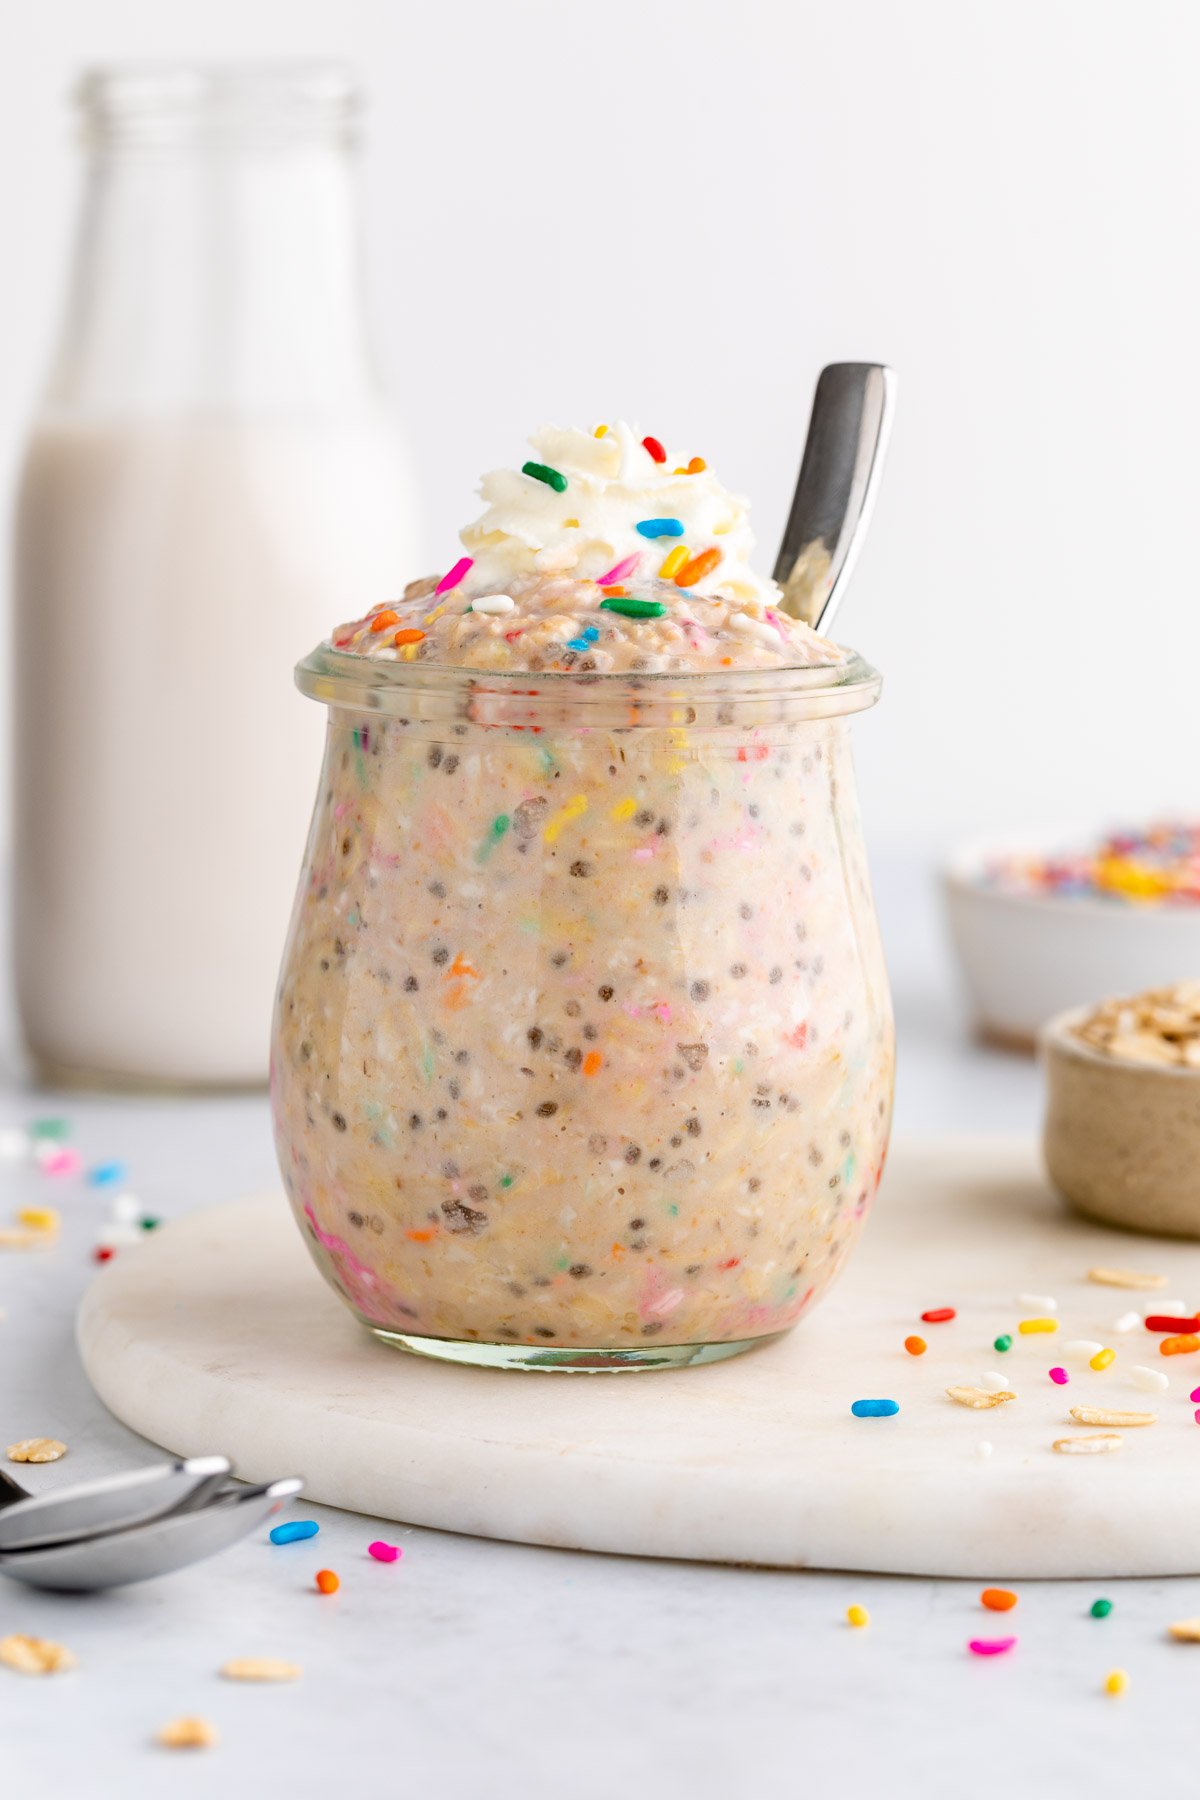 birthday cake overnight oats with sprinkles in a jar and whipped cream on top